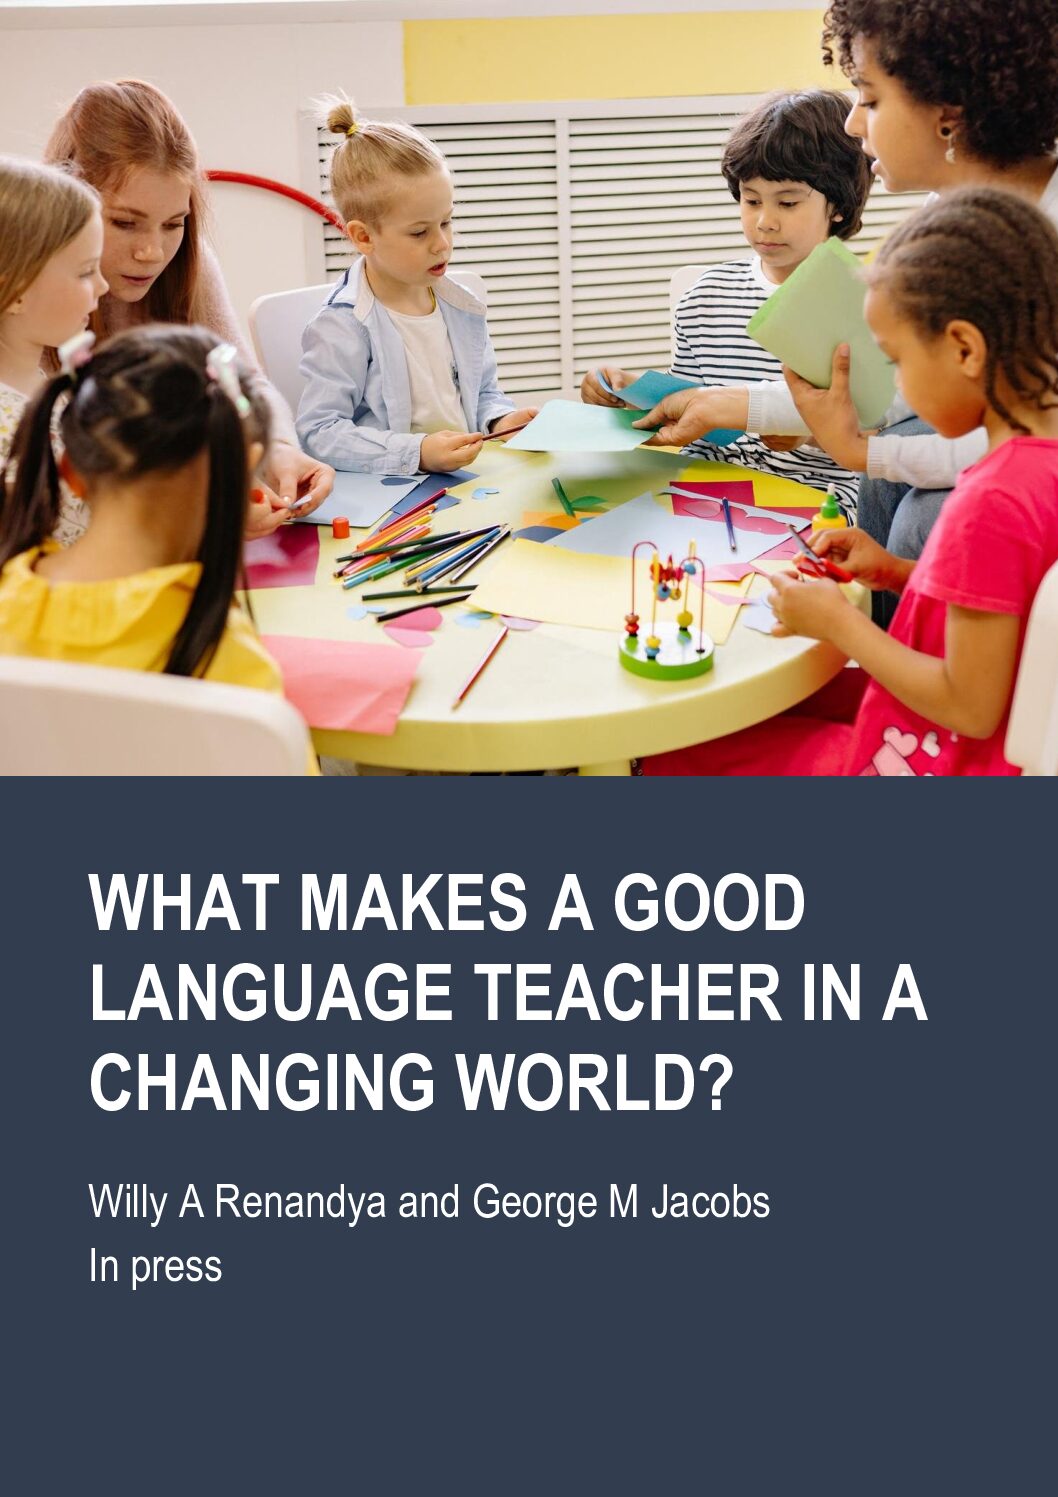 What makes a good language teacher in a changing world?